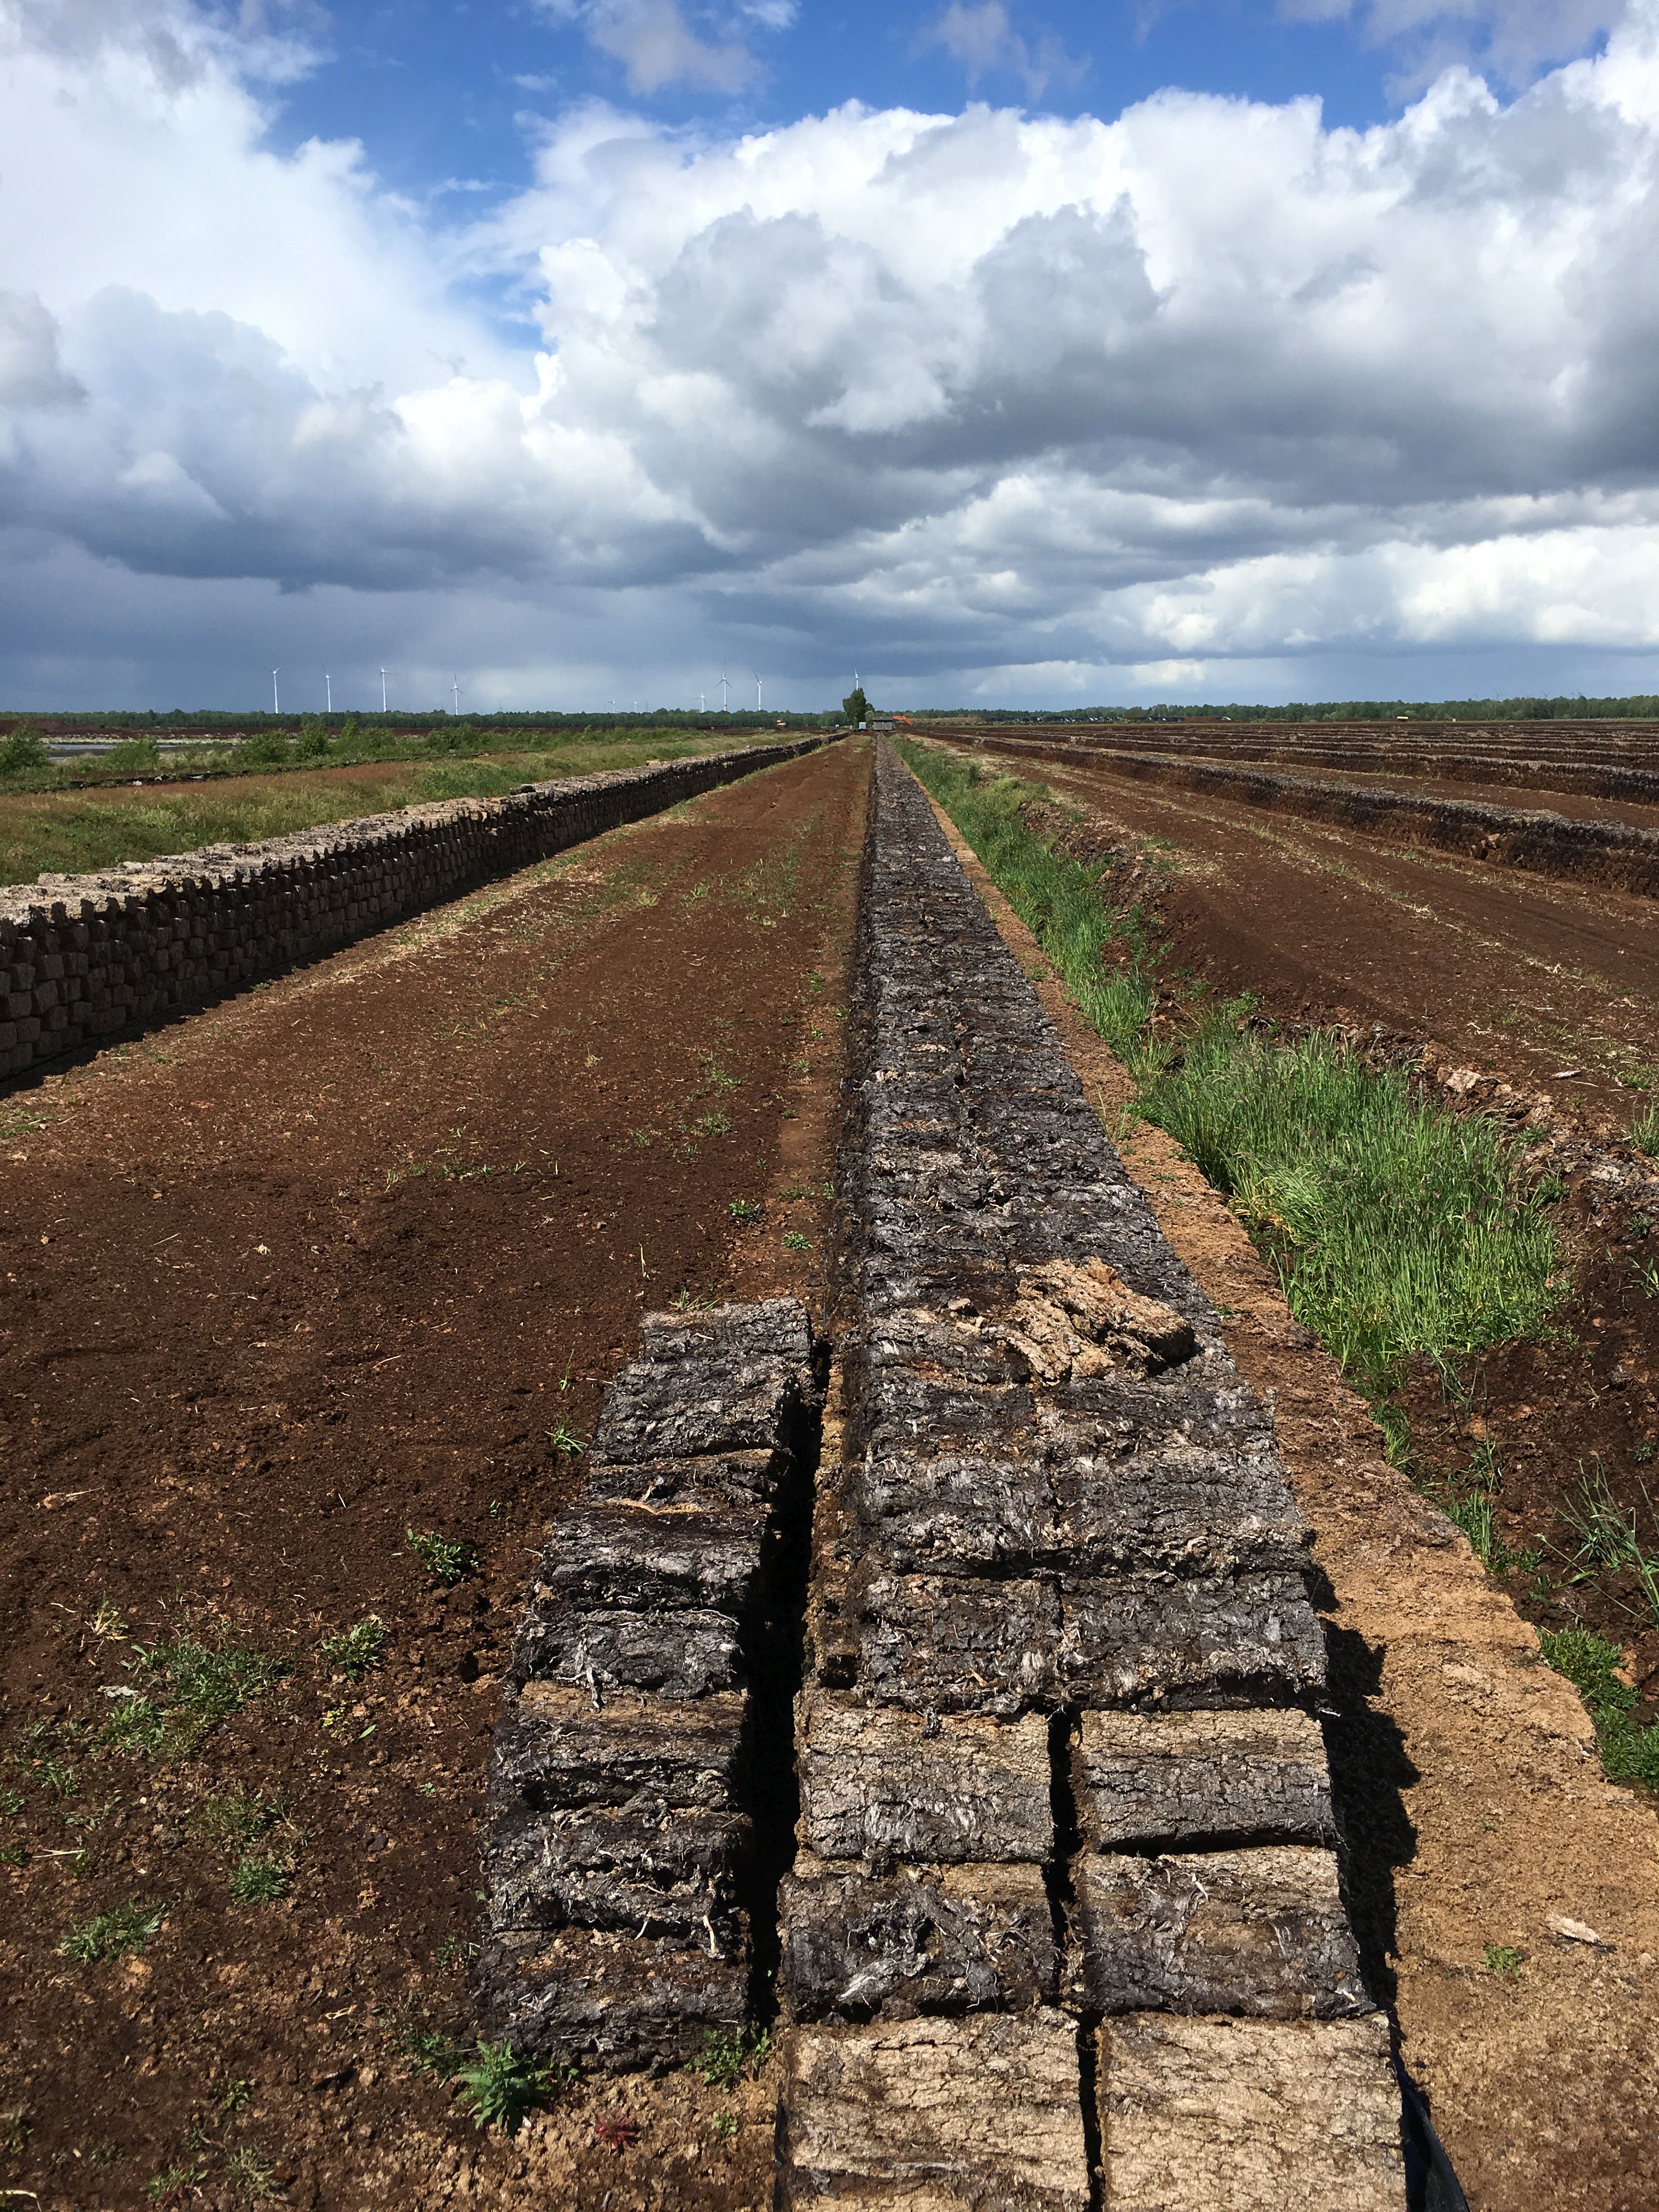 Arable landscape with stacked peat bales